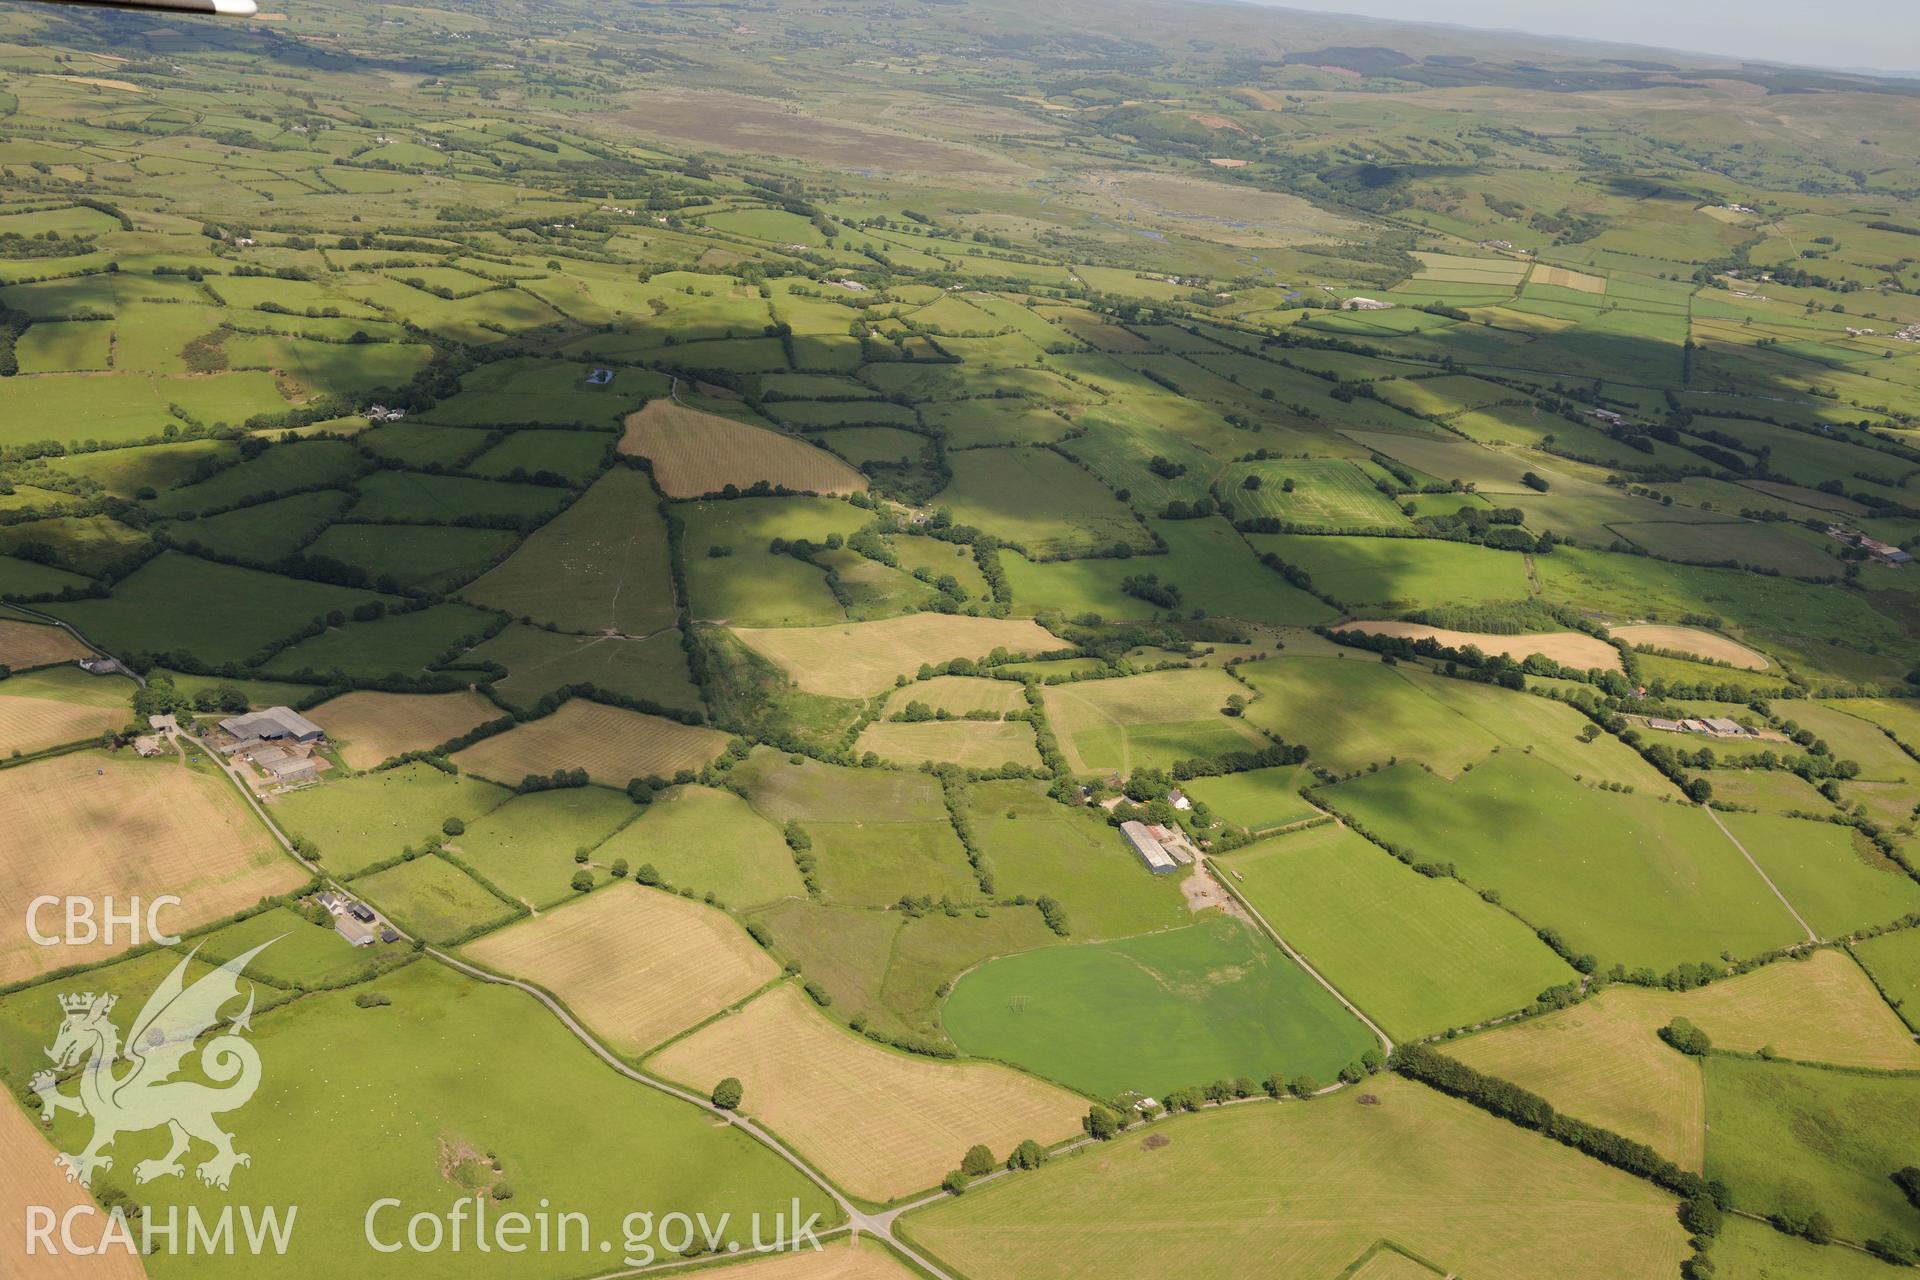 Deri Odwyn, a possible early field system at Deri Odwyn and Llwynpiod chapel in the distance (left hand corner of the photograph). Oblique aerial photograph taken during the Royal Commission's programme of archaeological aerial reconnaissance by Toby Driver on 30th June 2015.